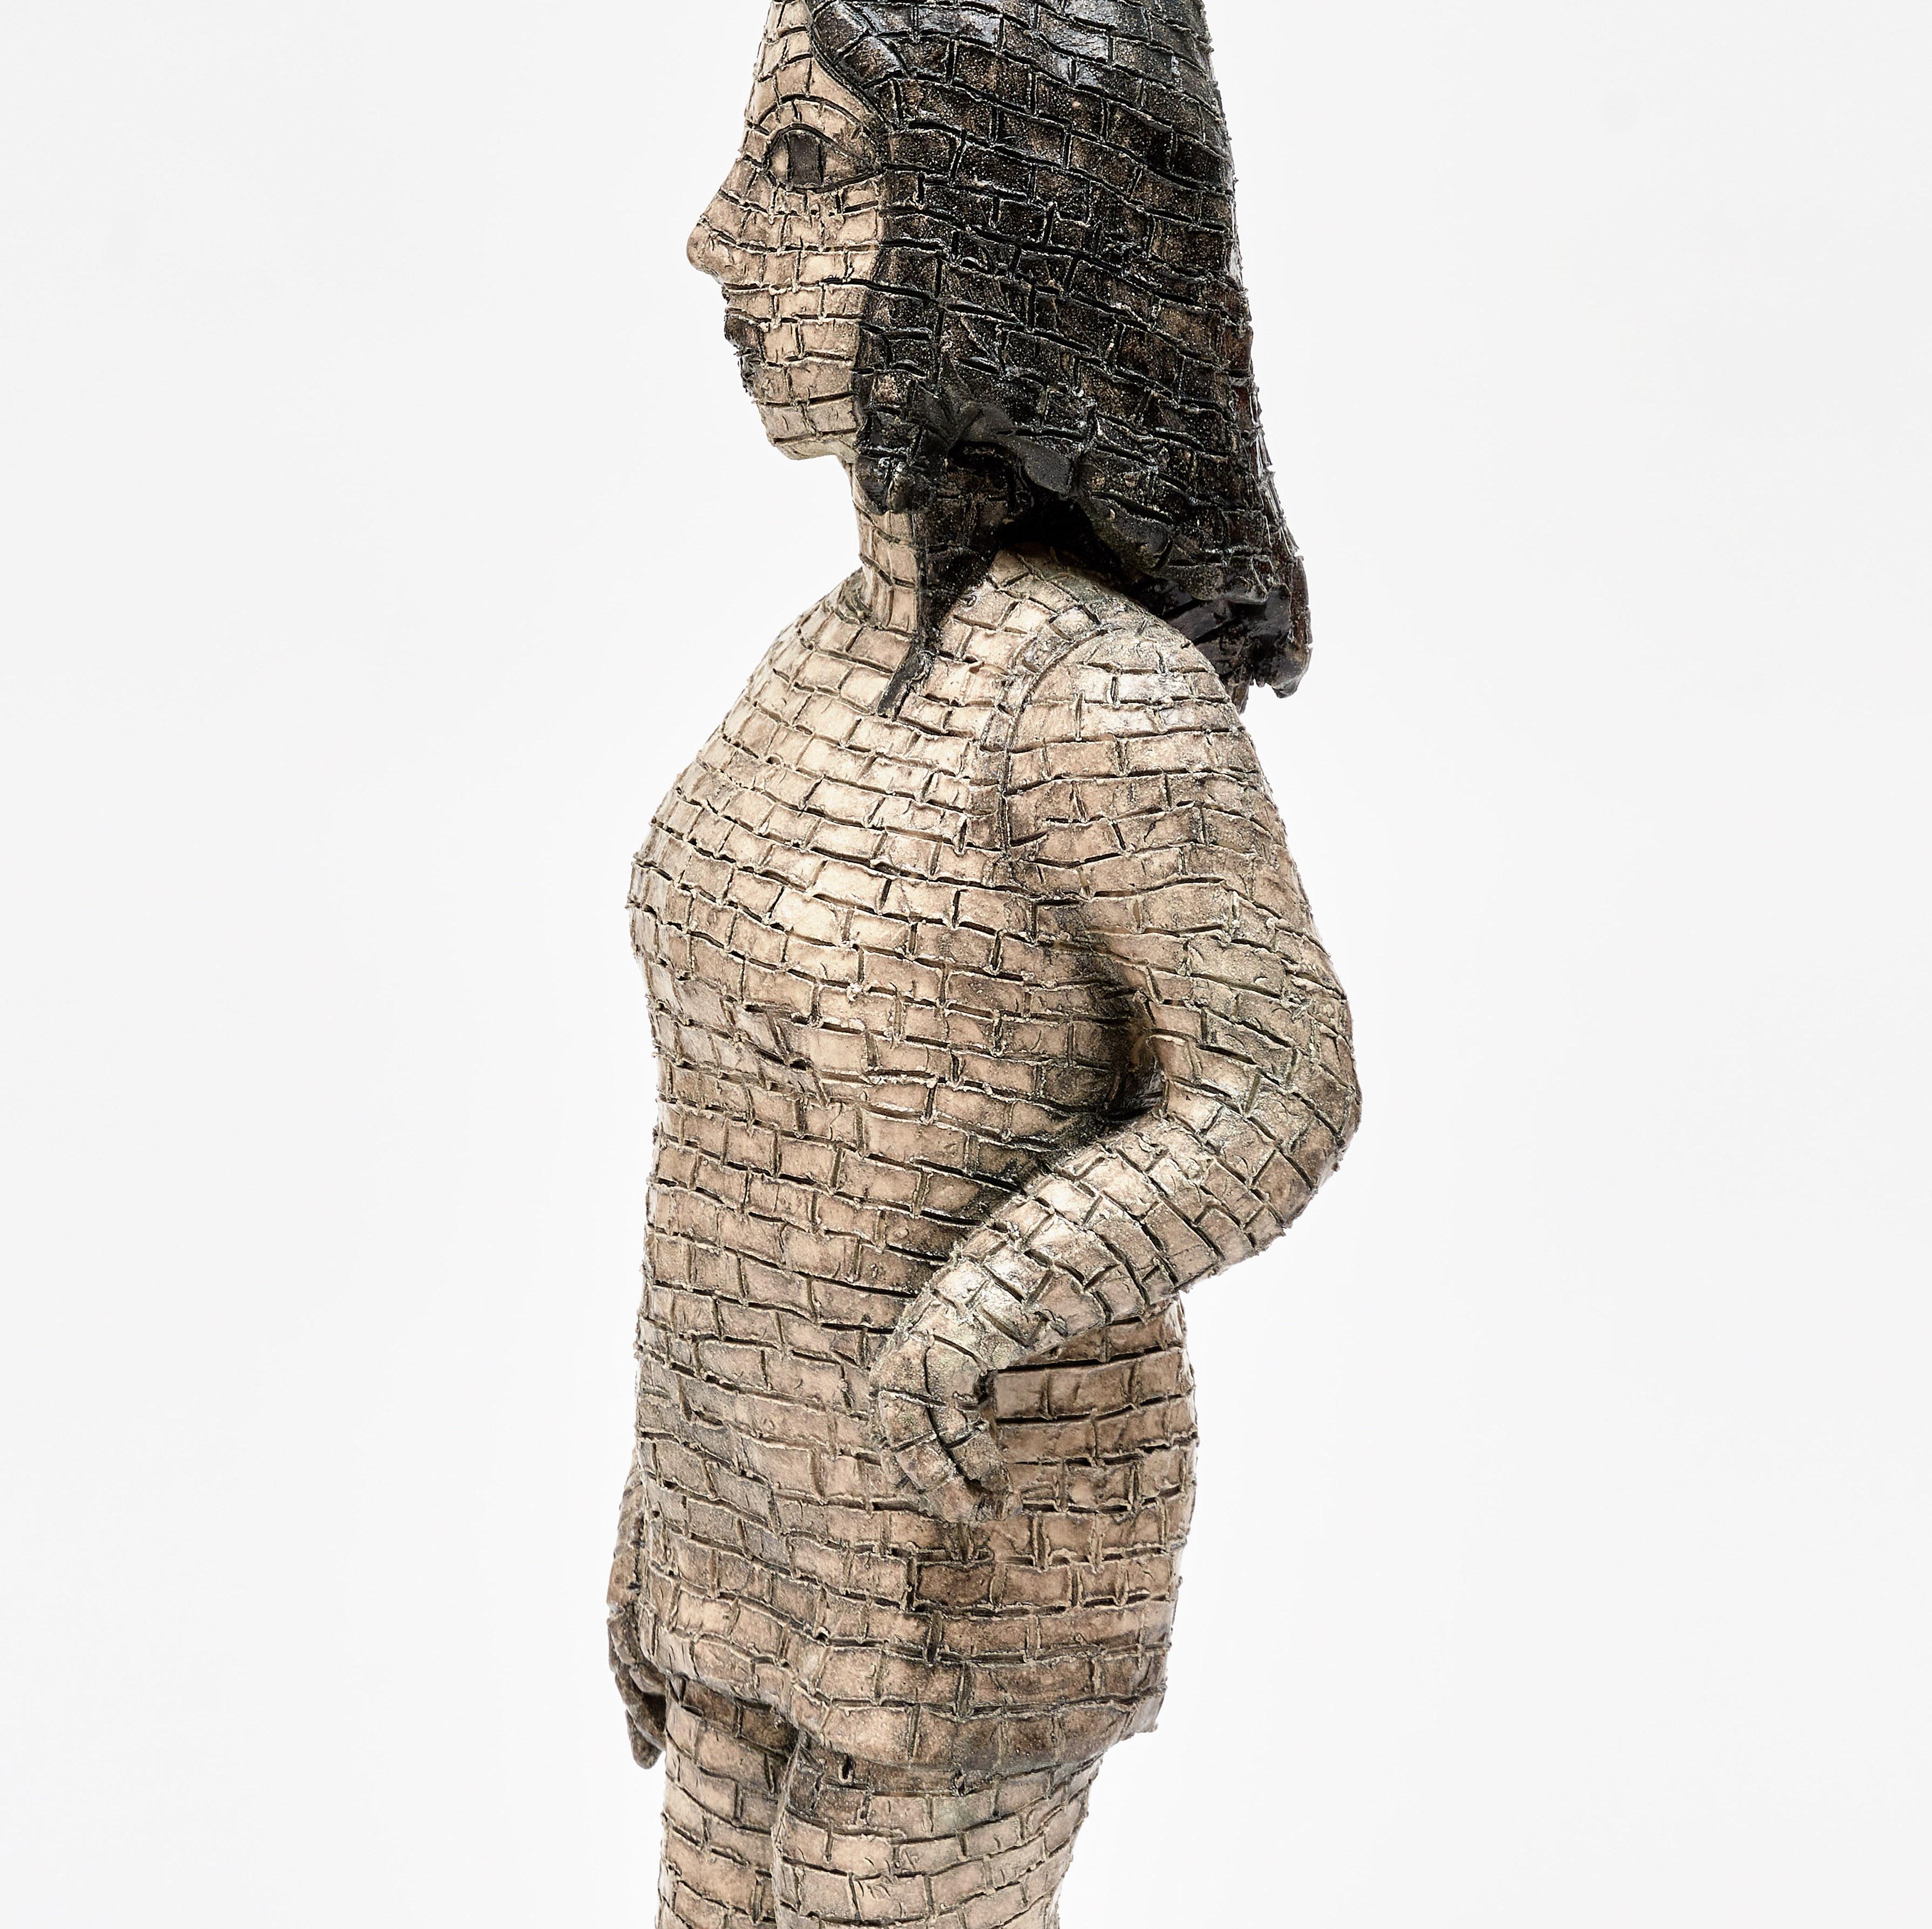 Kristalova is best known for her figurative ceramic sculptures that incorporate aspects of the human body and elements of nature. Across her oeuvre, she explores transition as a stage essential to both human and ecological life. Crafted in the